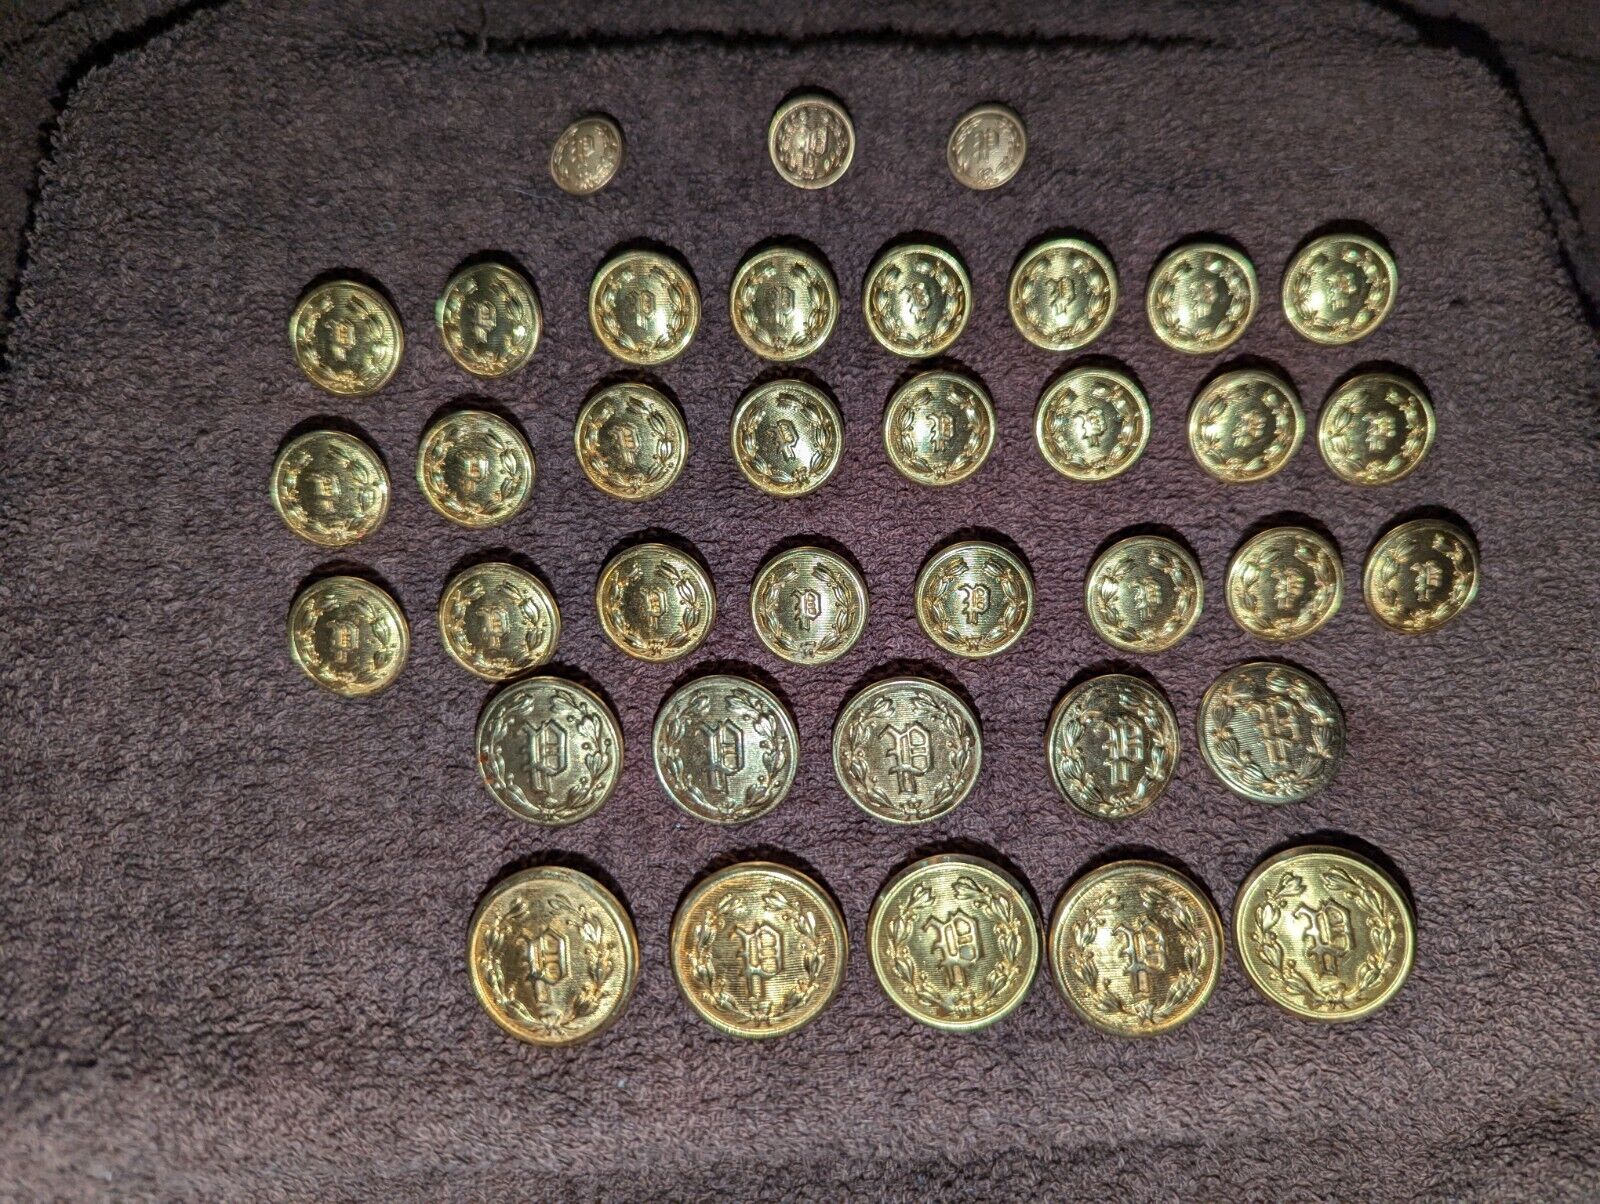 MIXED LOT 37 VINTAGE GOLD-TONE METAL BUTTONS LETTER P POLICE UNIFORM WATERBURY